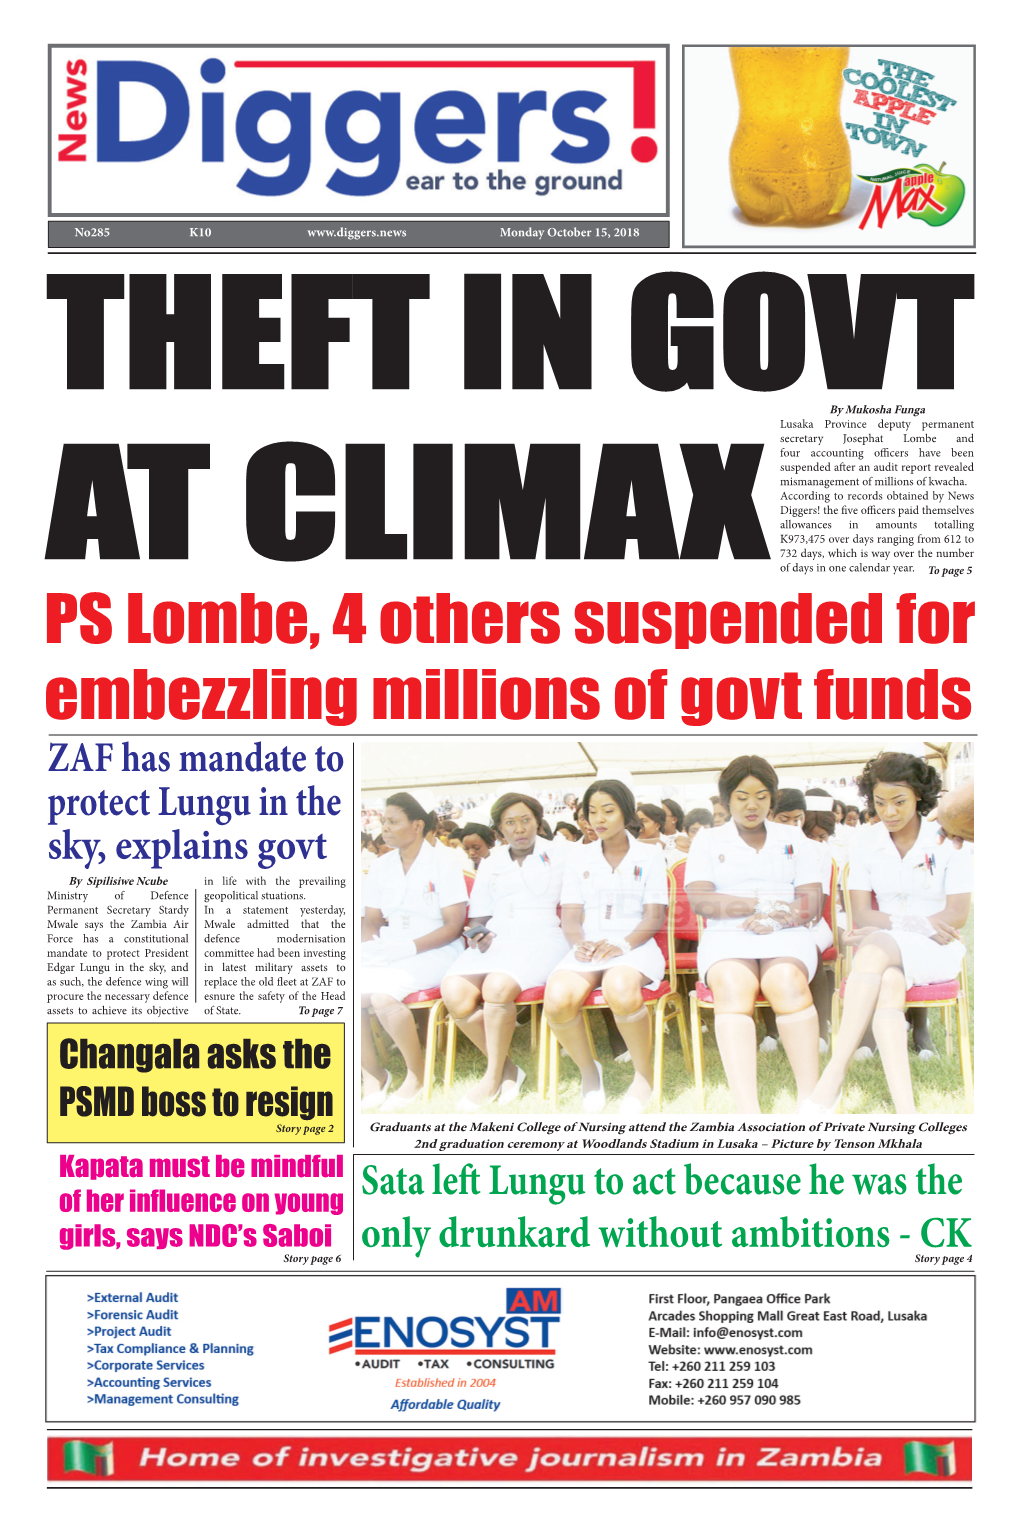 PS Lombe, 4 Others Suspended for Embezzling Millions of Govt Funds